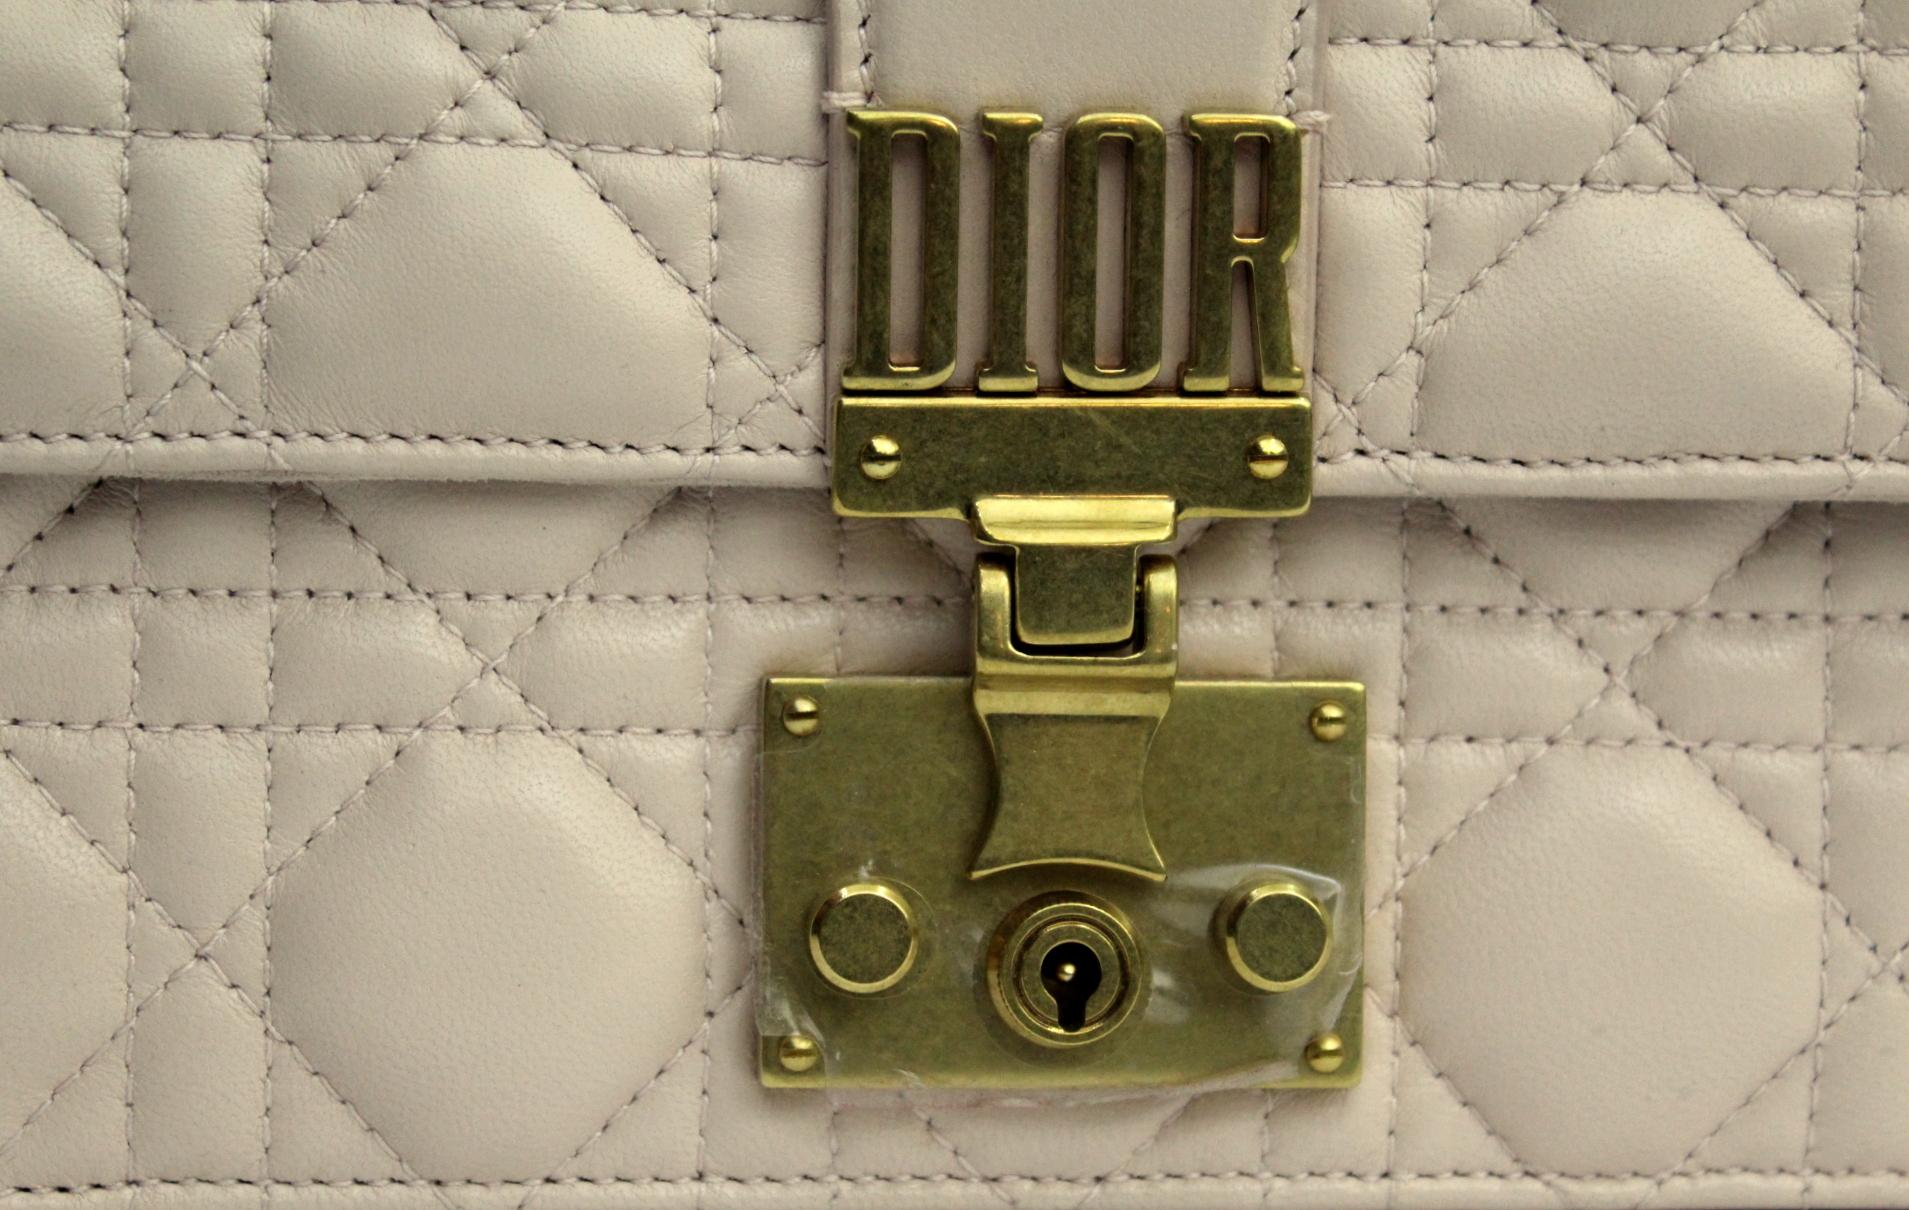 Superb Dior line Addict in quilted lambskin in a very delicate shade of pink.
Enriched by a particular golden closure, and equipped with an adjustable chain handle also gilded.
Perfect both for the day and for the evening.
VERY GOOD CONDITION!